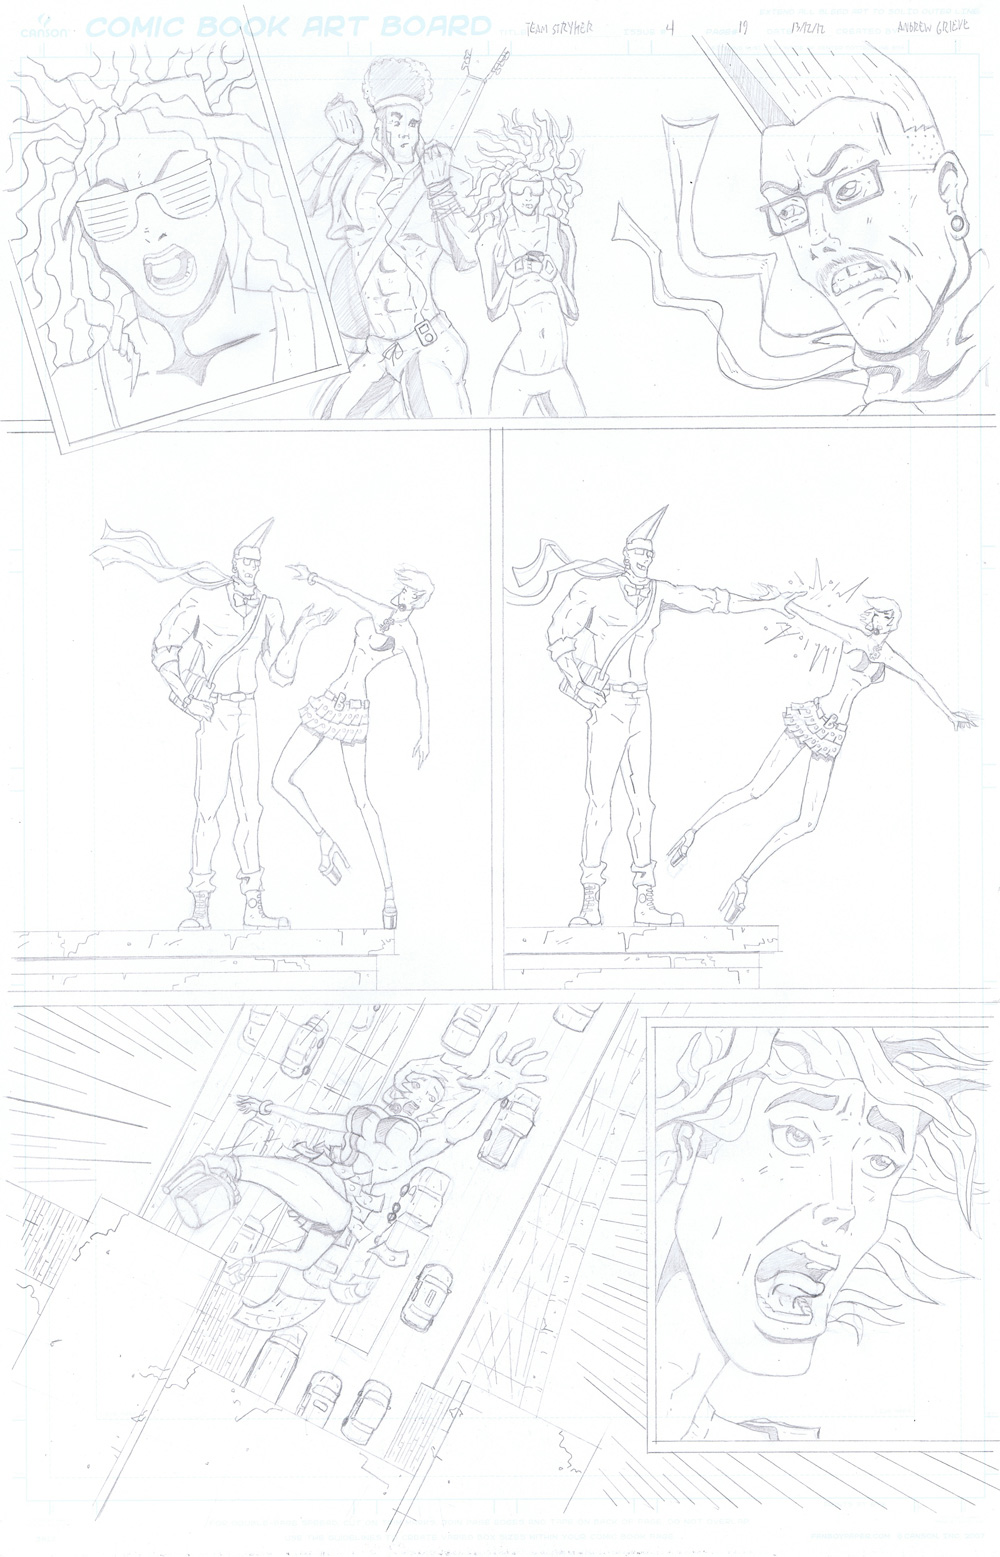 MISSION 004: PAGE 19 PENCIL